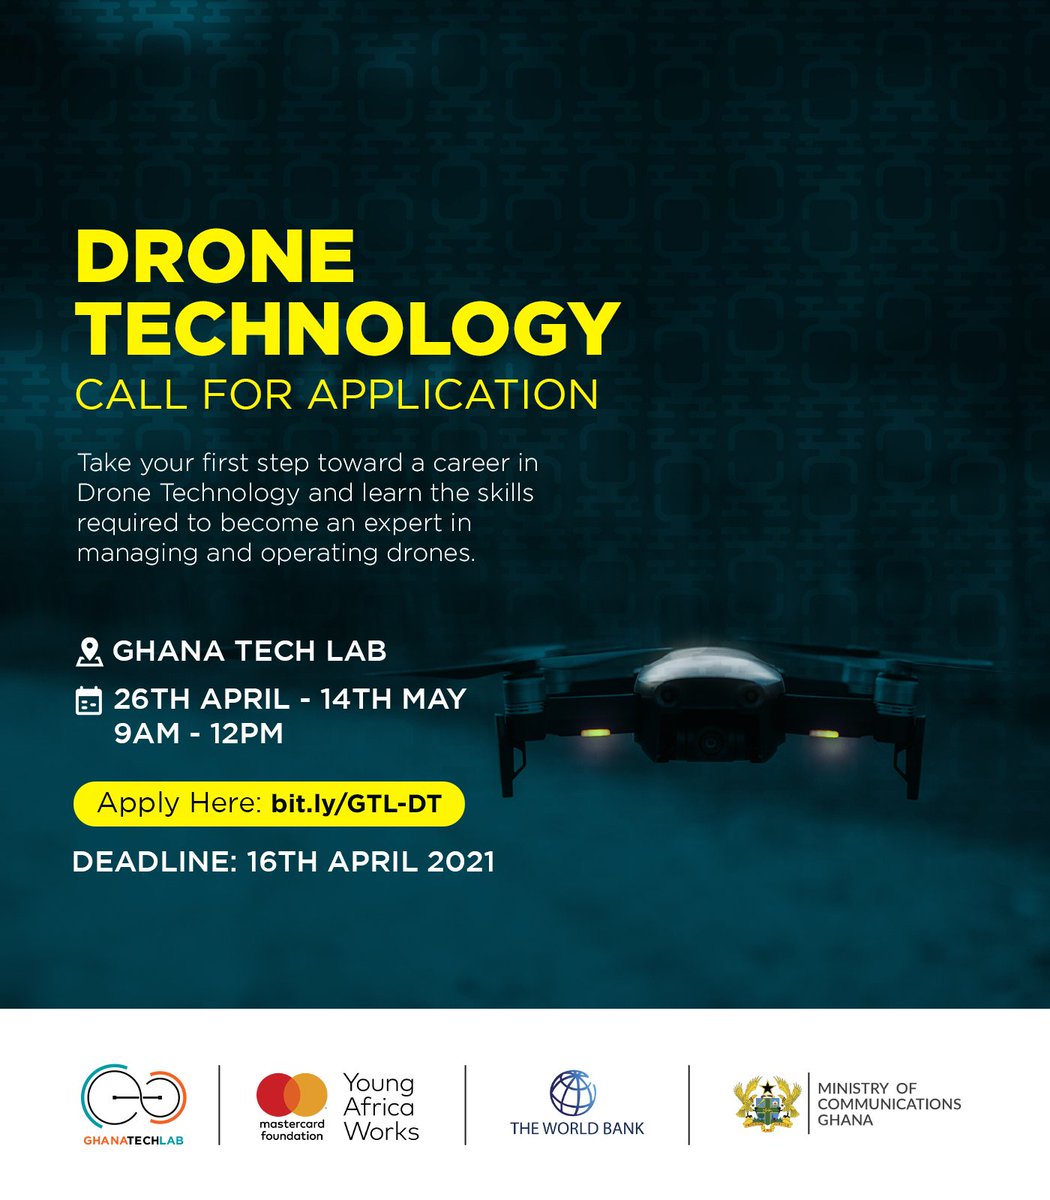 Call for Application

Drone Technology is needed in all sectors, and it is a great skill to have. Learn the basic skills required to manage and operate Drones. 

Apply here: bit.ly/GTL-DT to join the program. 

Deadline: 16th April 2021 

#GTLImpact
#DronesTechnology